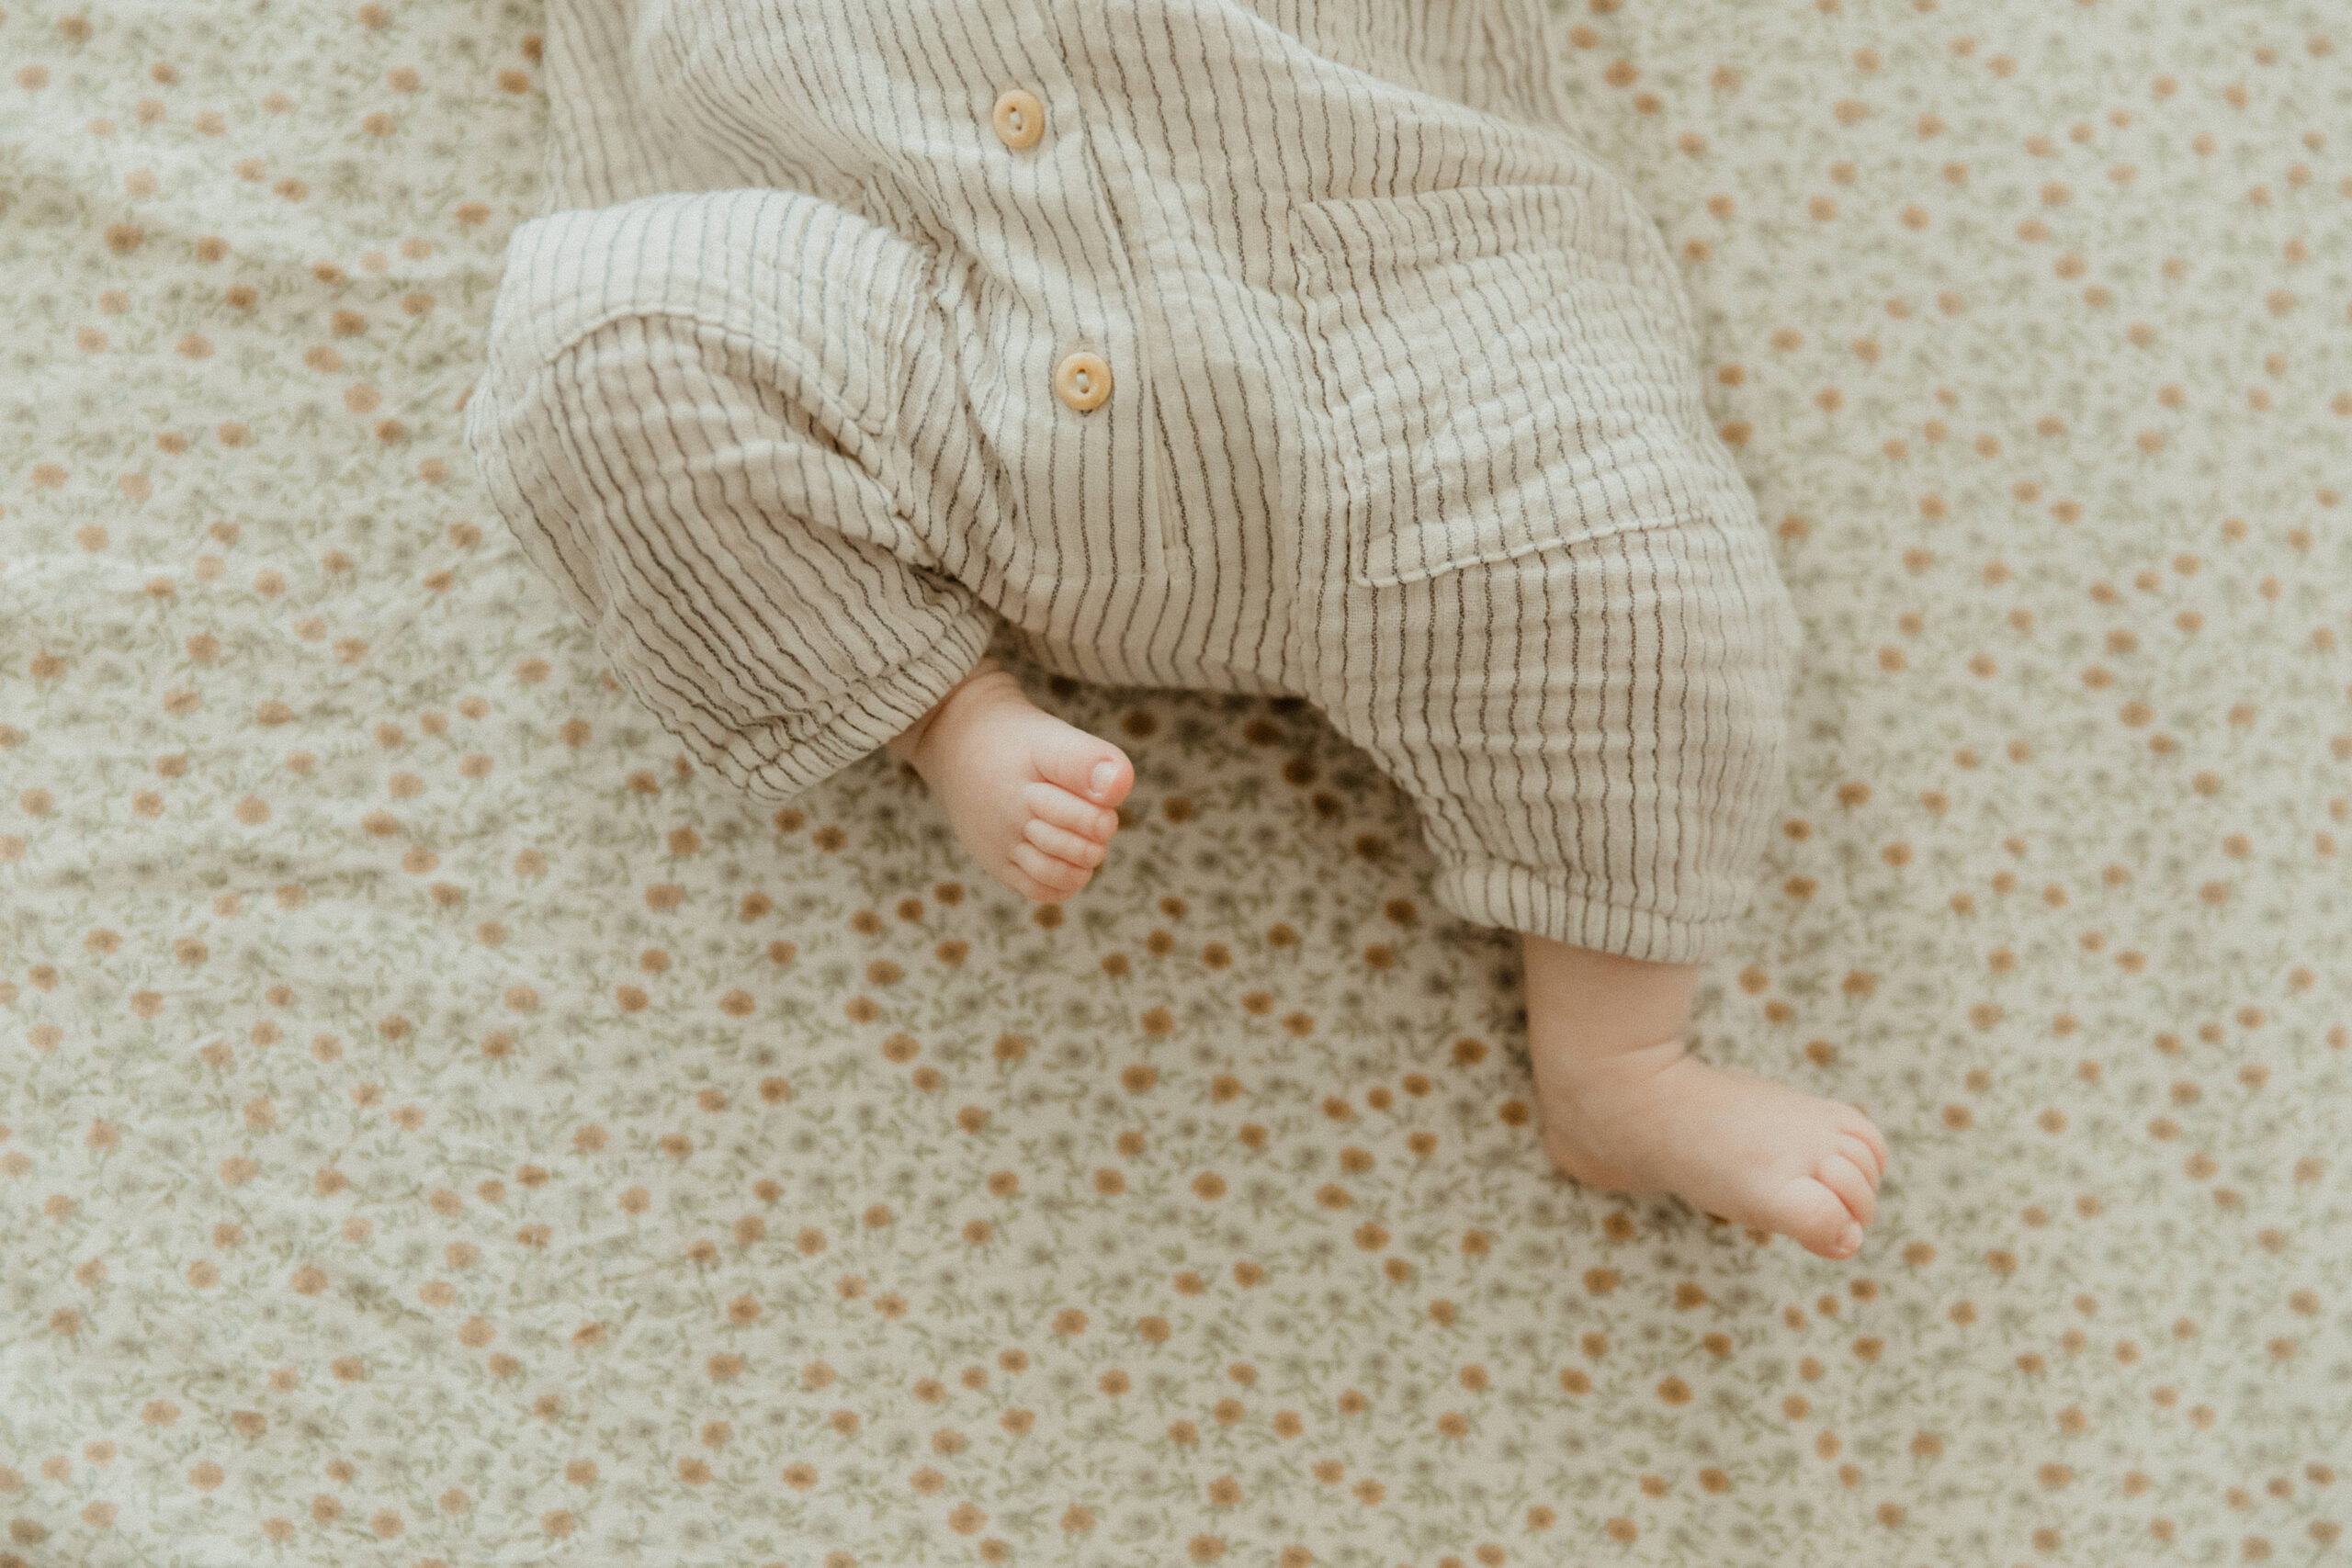 photo of an infant's little toes on a patterned sheet